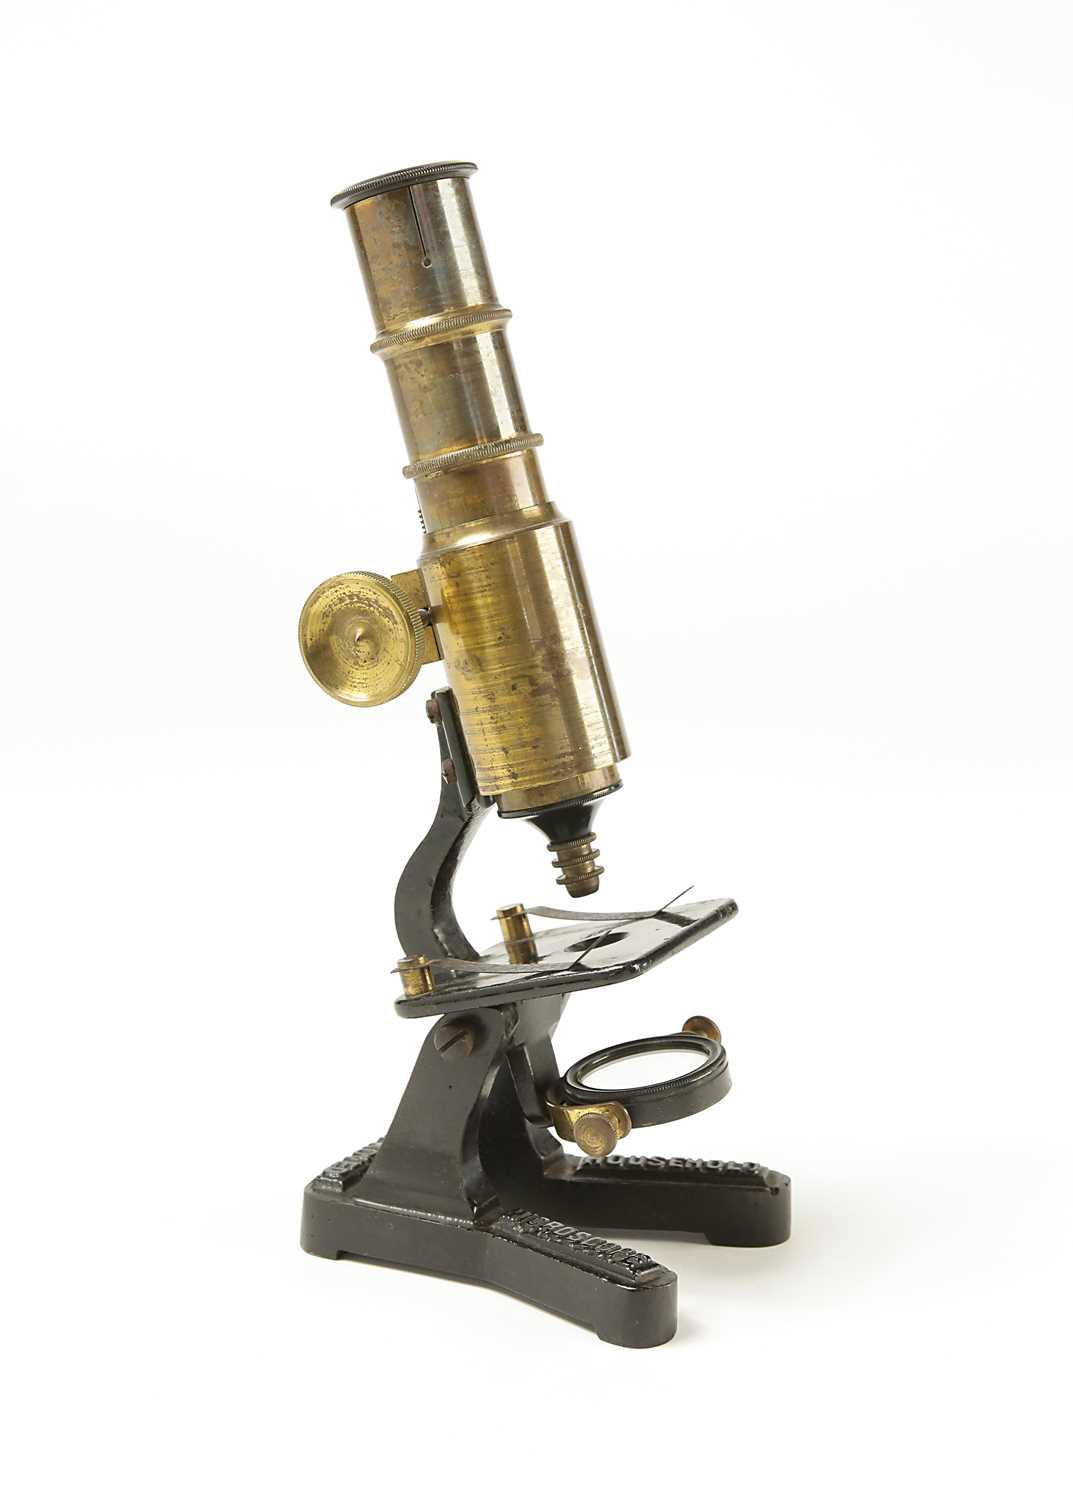 Lot 90 - Improved Household Microscope, First Half 20th Century.